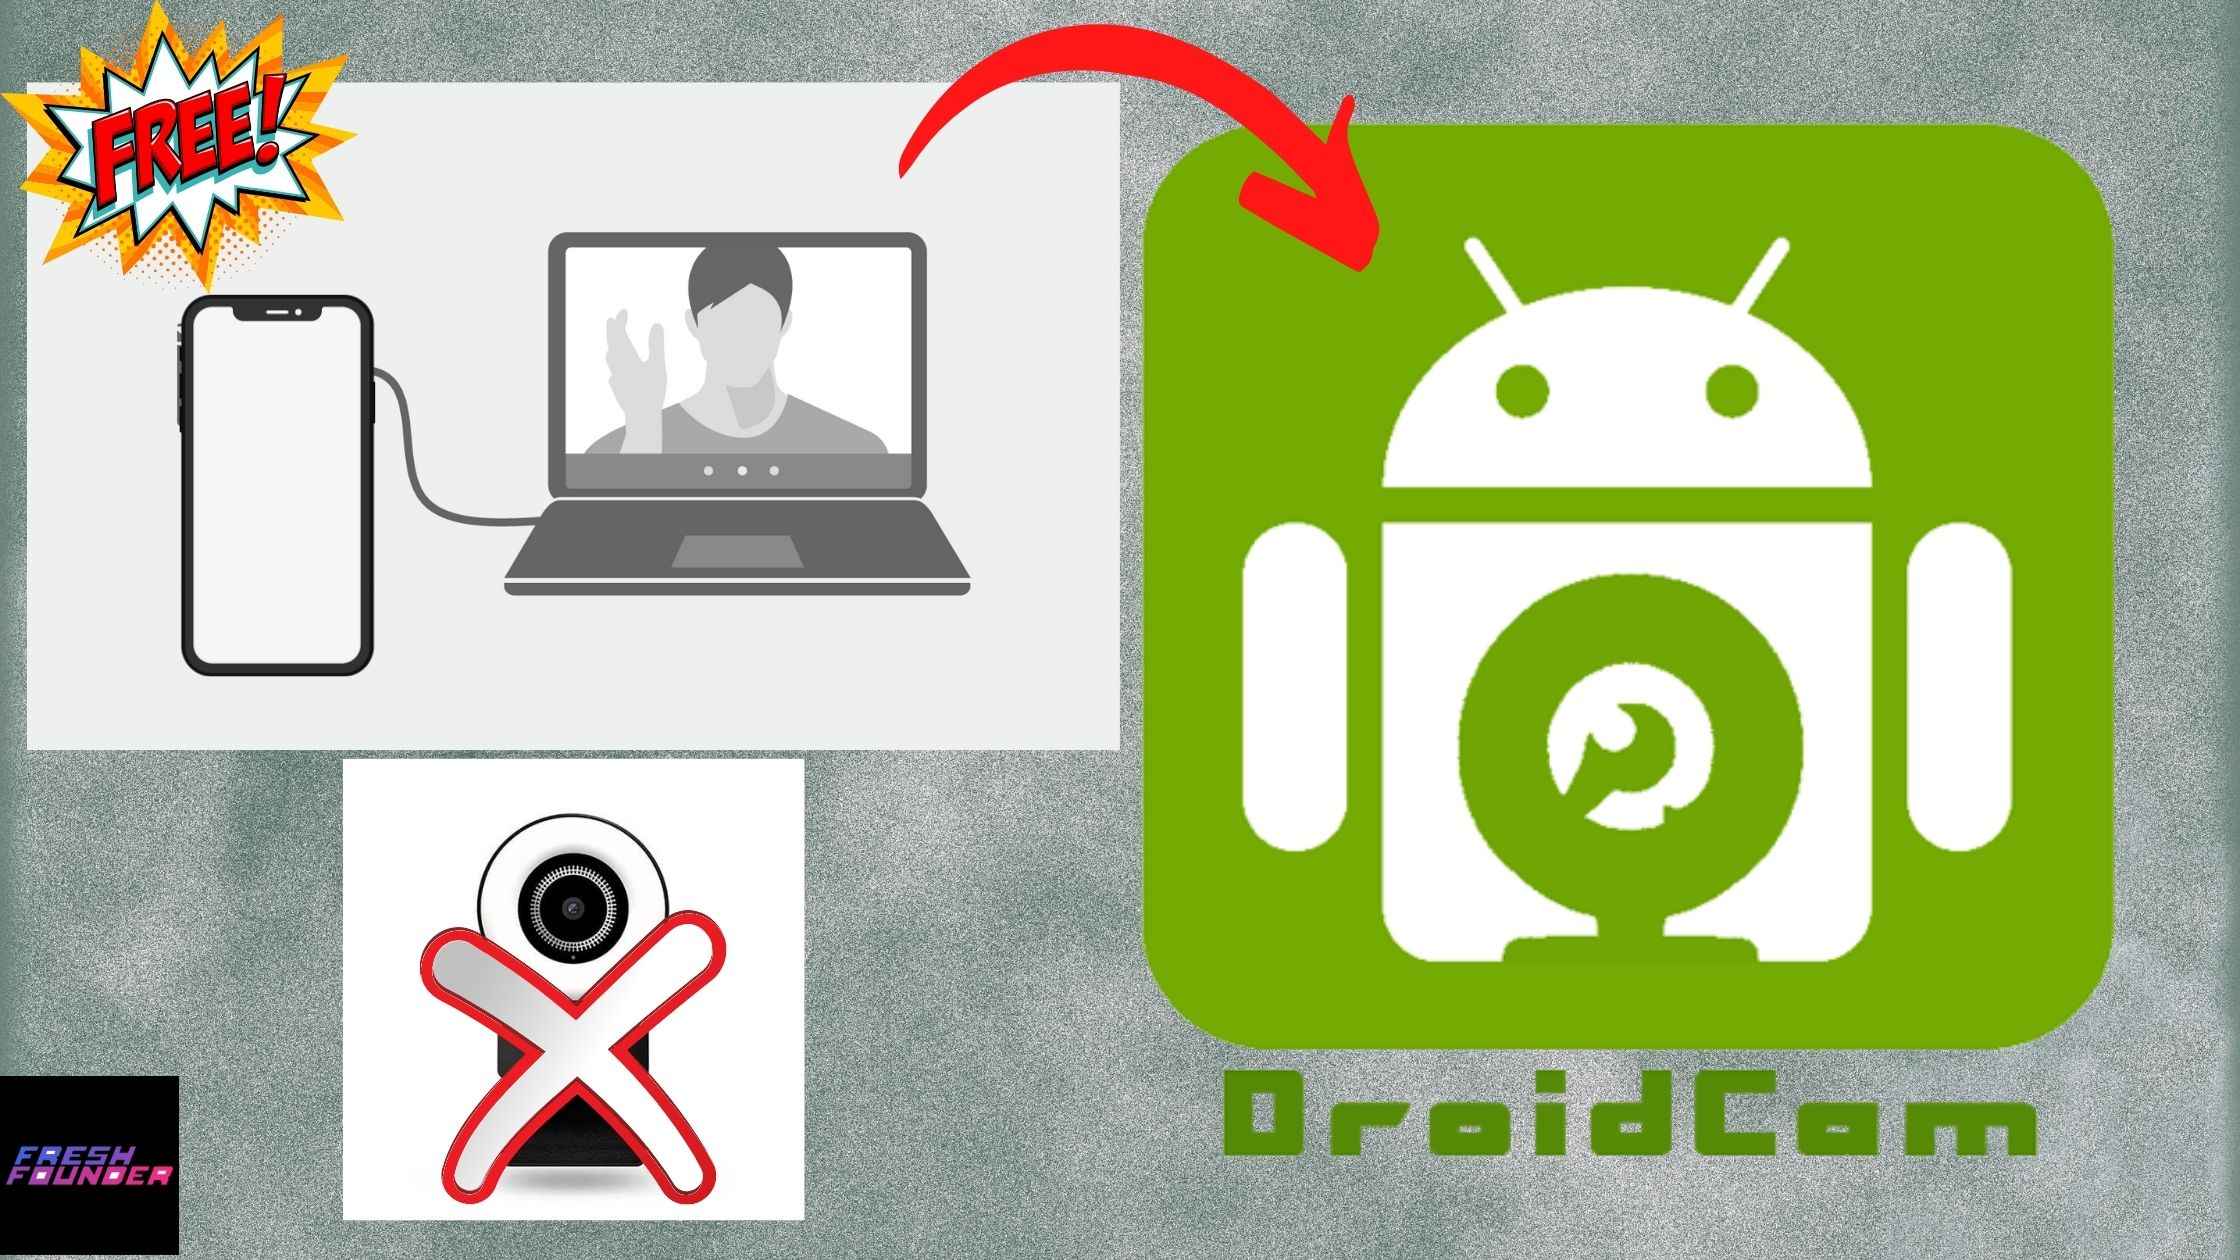 How can I get DroidCam for free?